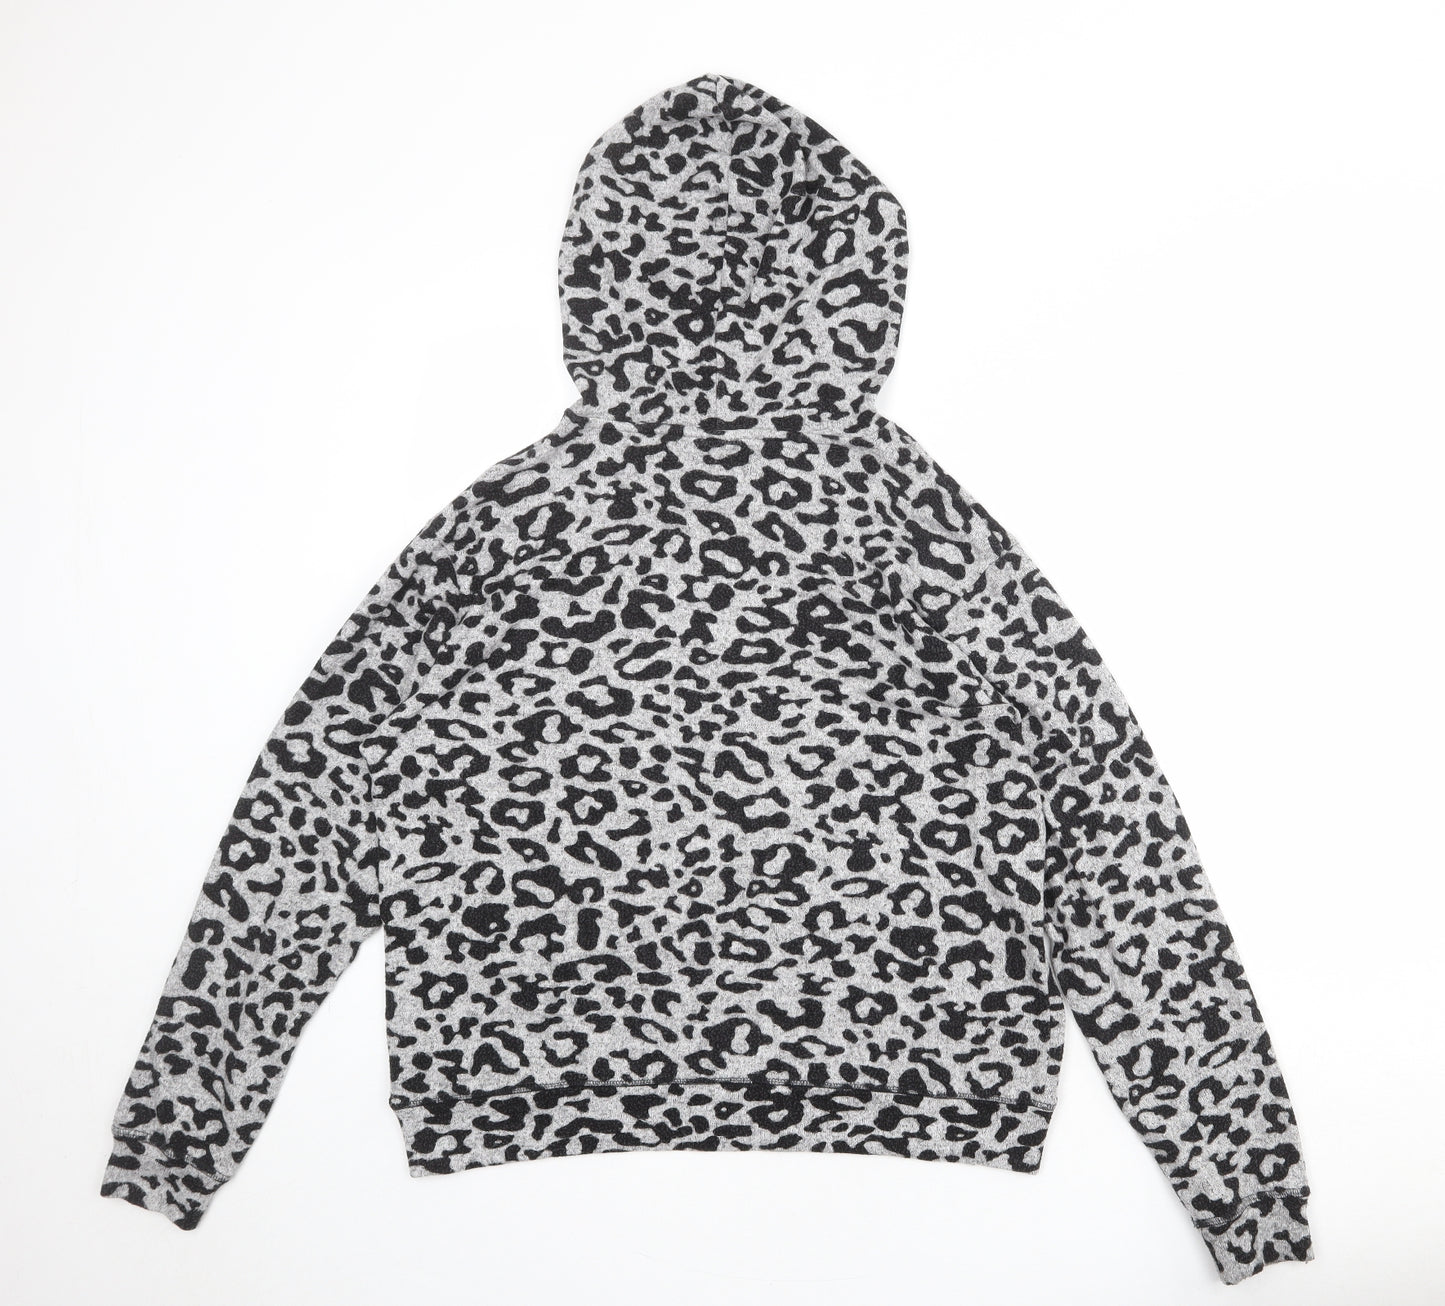 H&M Womens Grey Animal Print Viscose Pullover Hoodie Size M Pullover - Leopard pattern